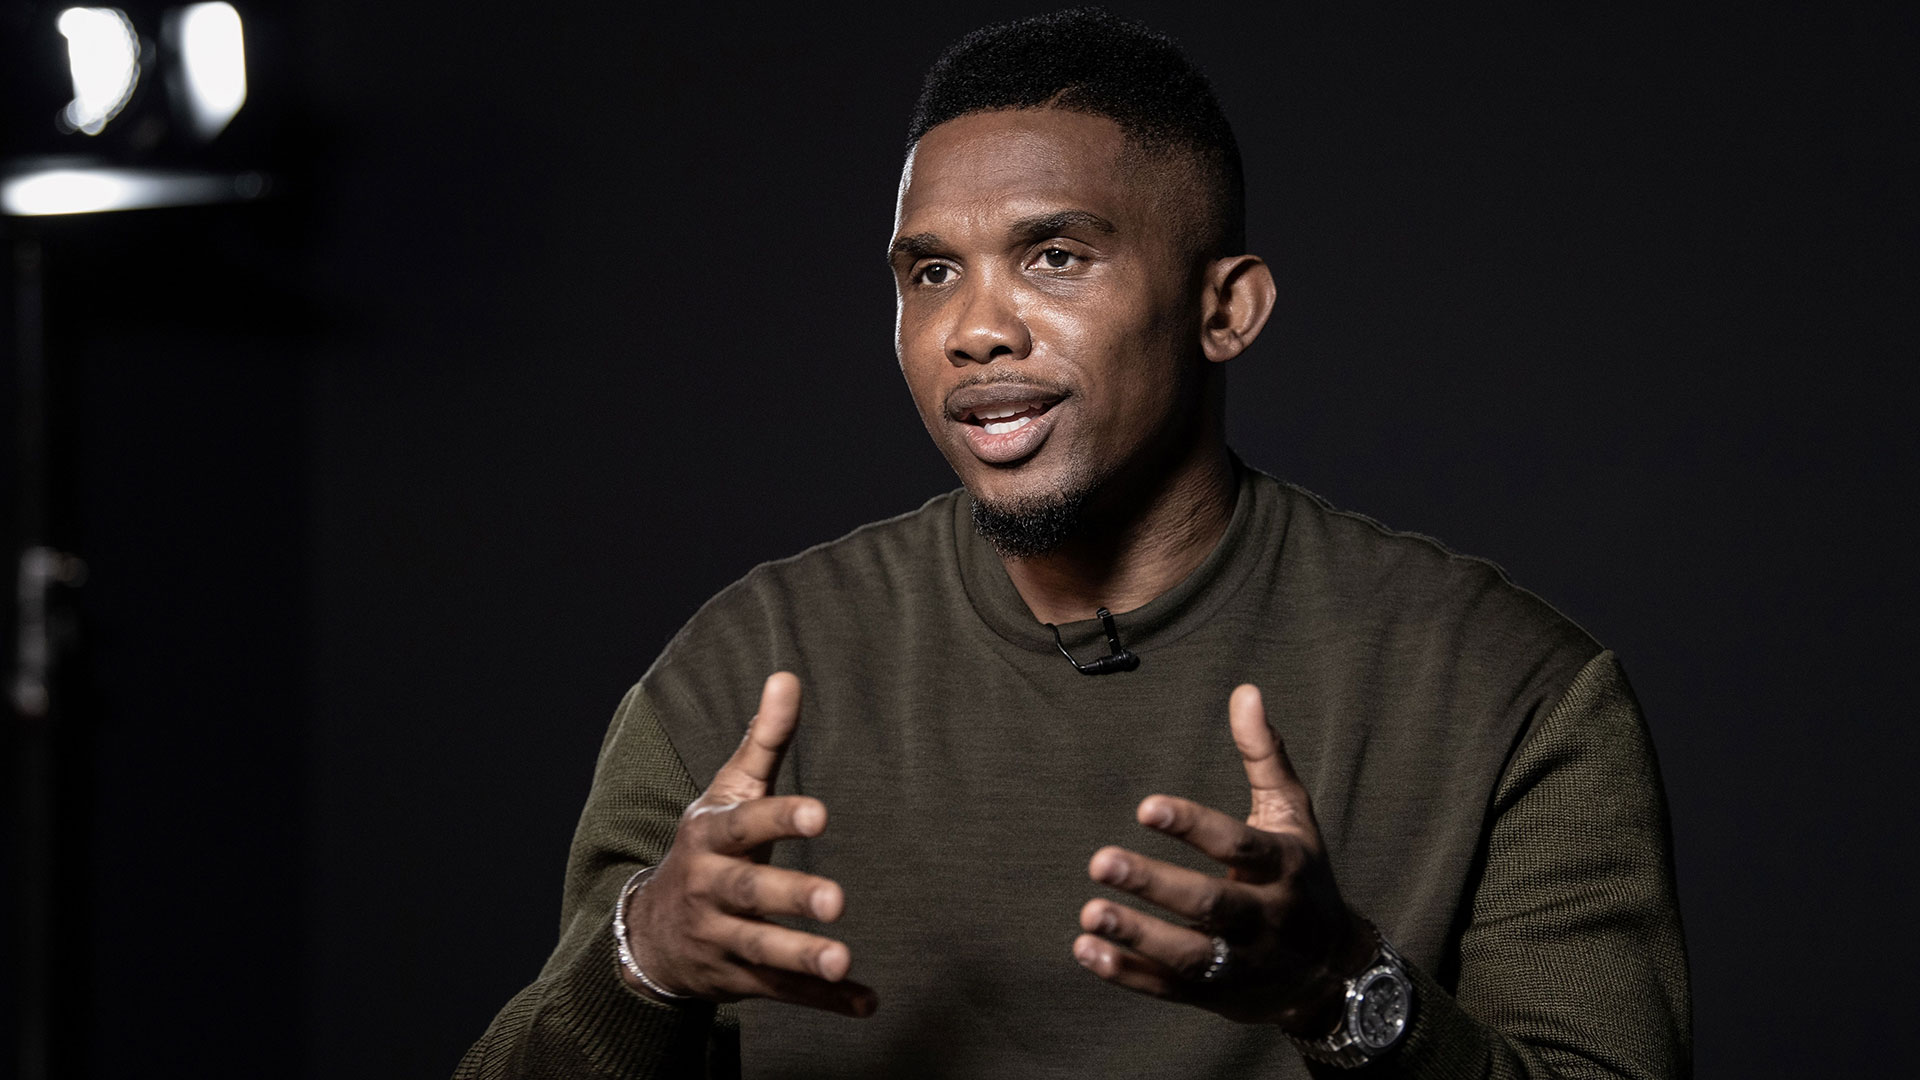 Coronavirus: Cameroon legend Eto'o sends out a plea to African people